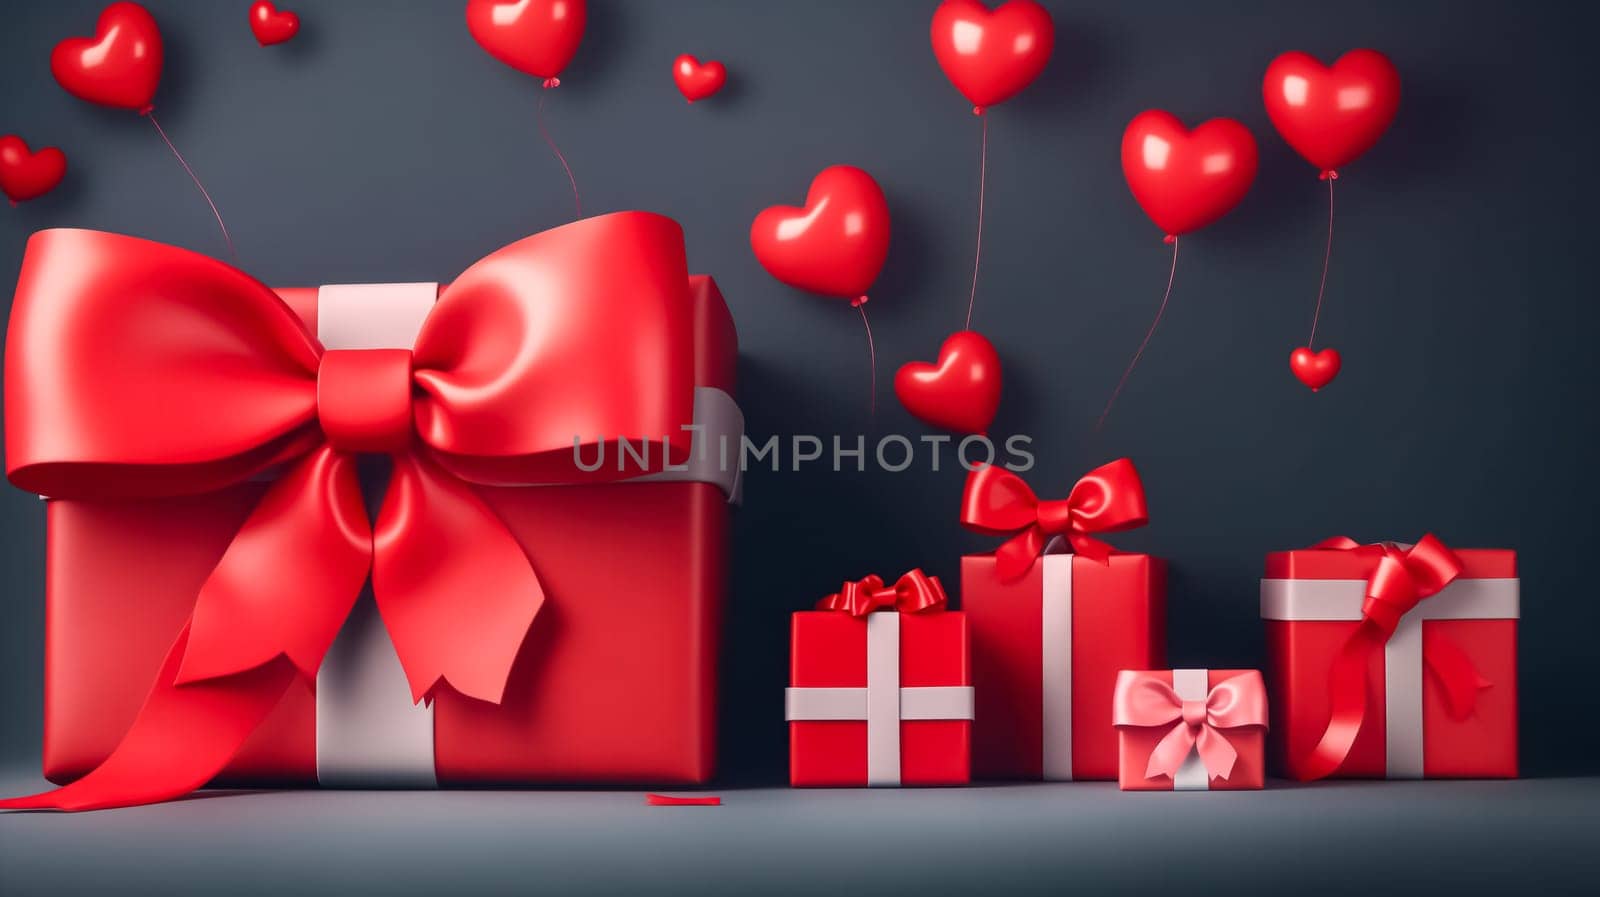 Valentines Day spirit with beautifully packaged gift boxes against a background of hearts. by Alla_Morozova93